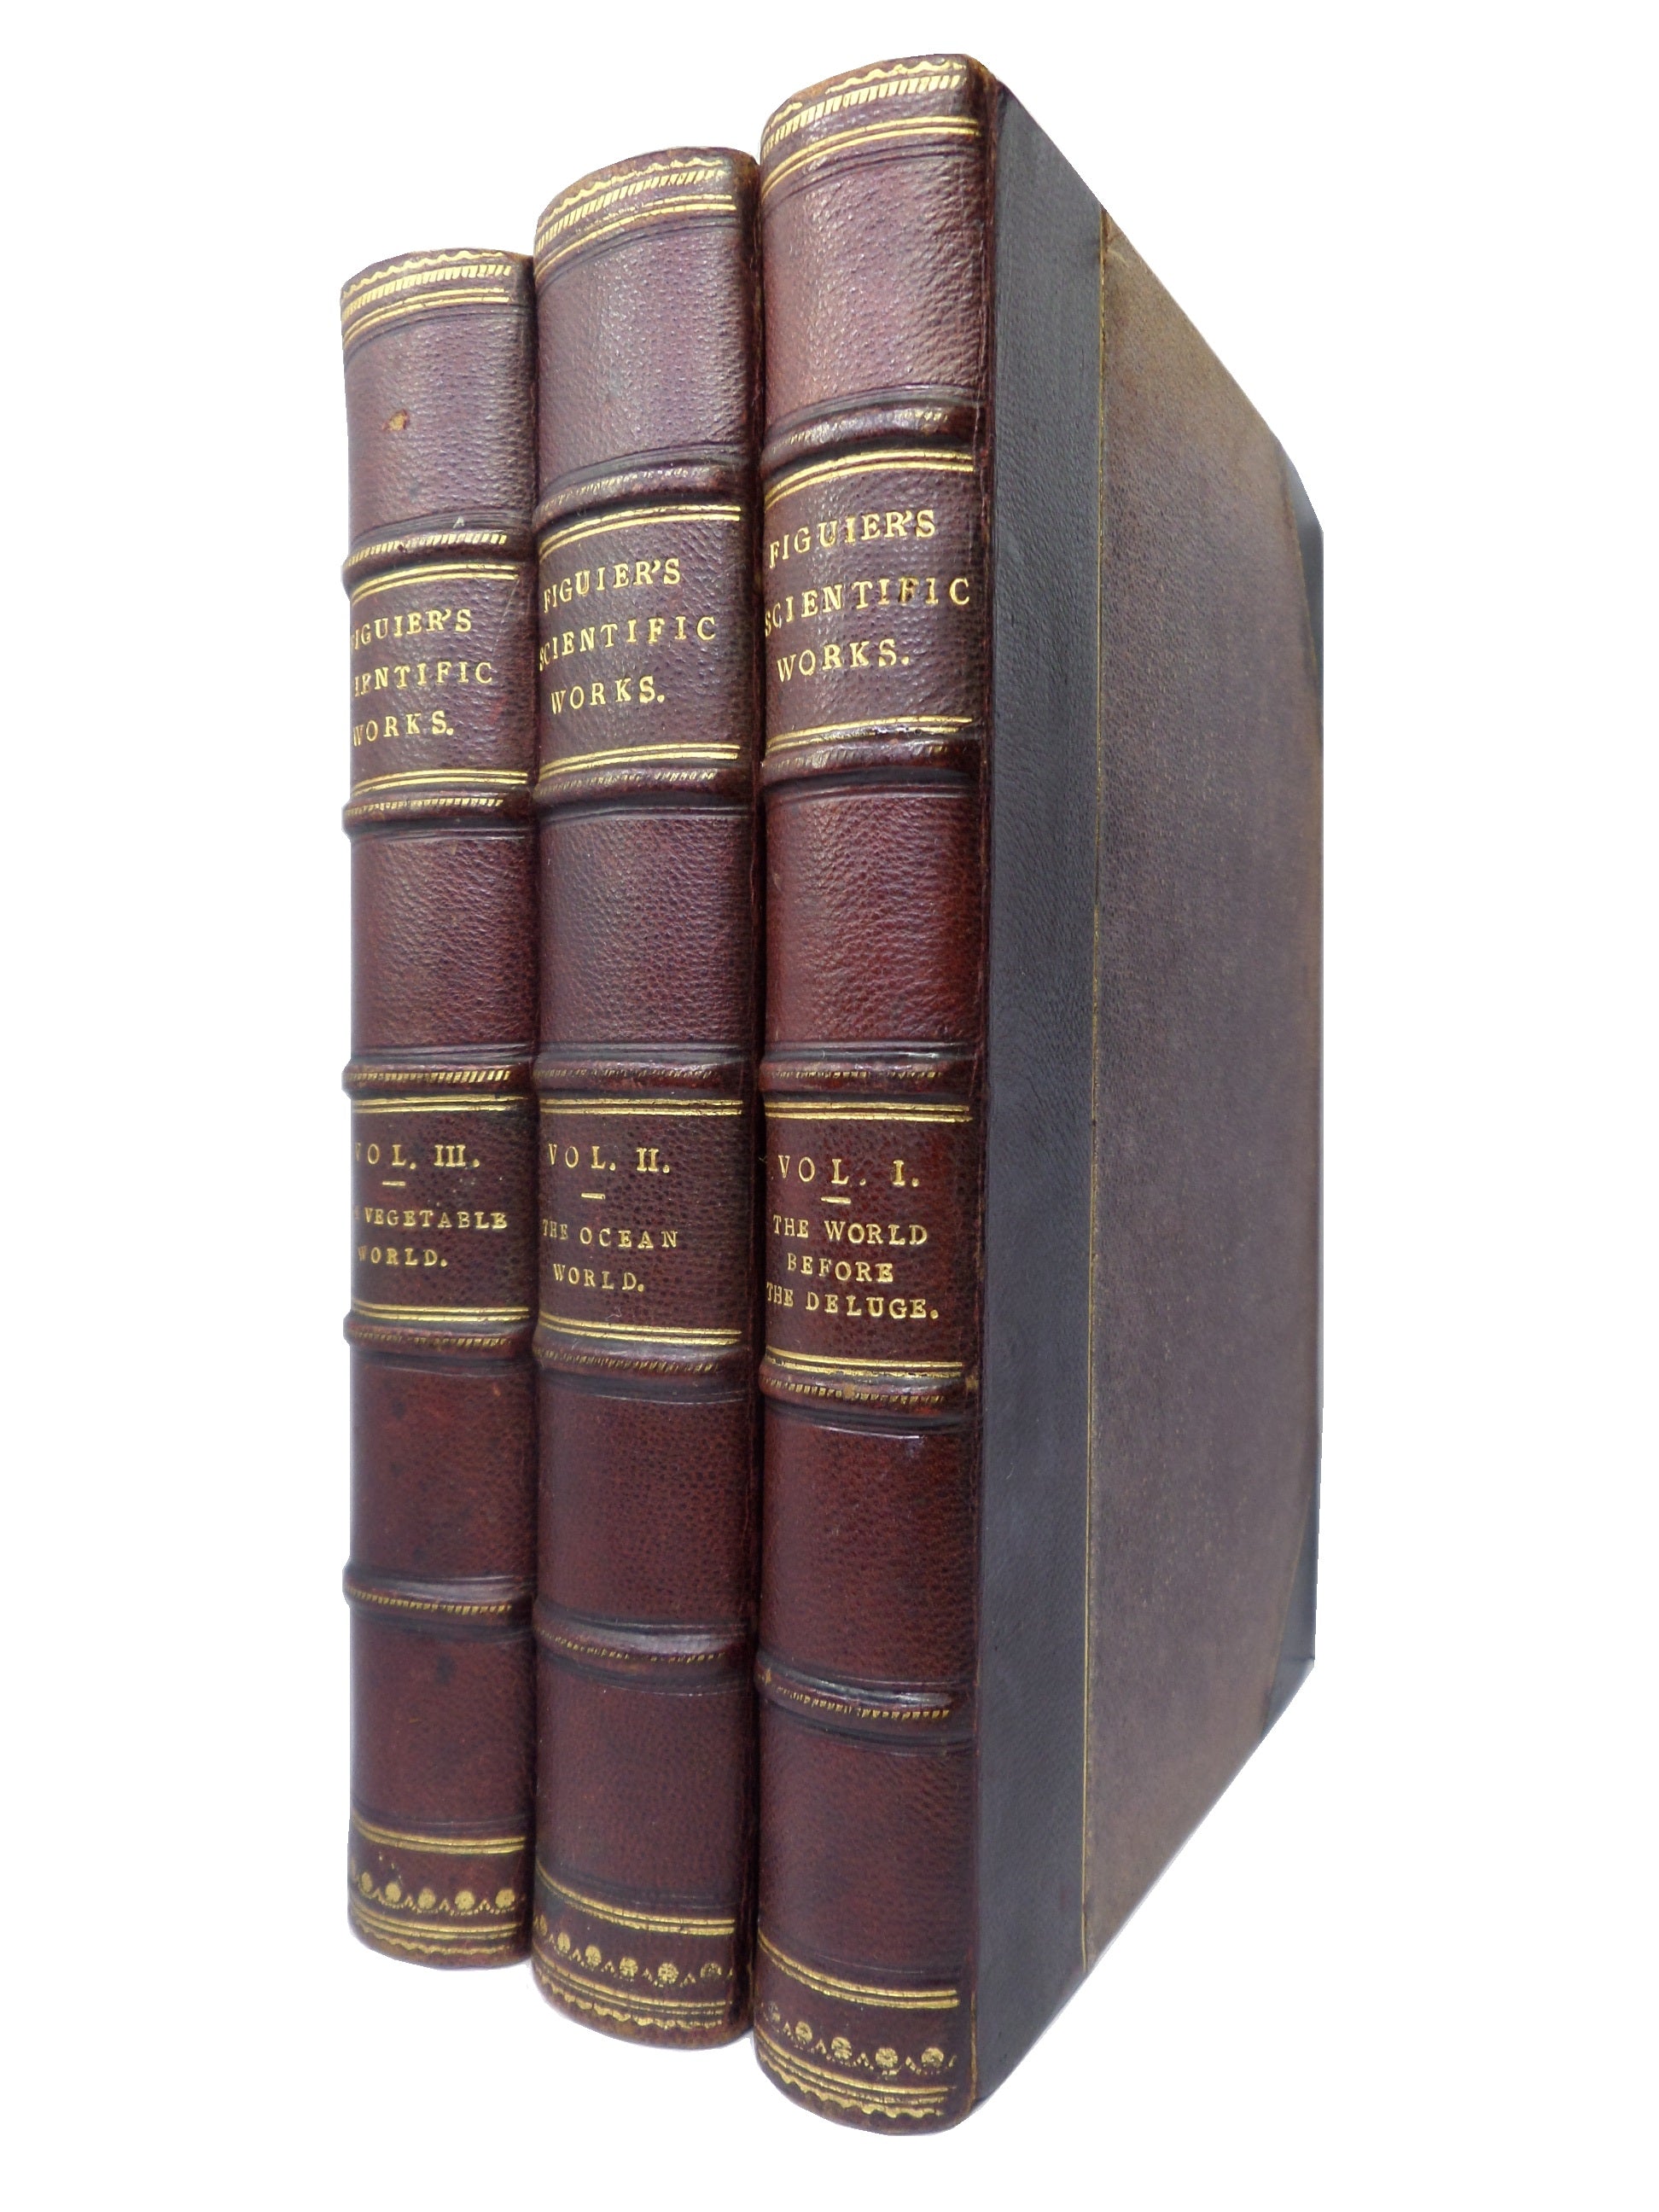 THE WORKS OF LOUIS FIGUIER IN THREE LEATHER-BOUND VOLUMES 1891-1892